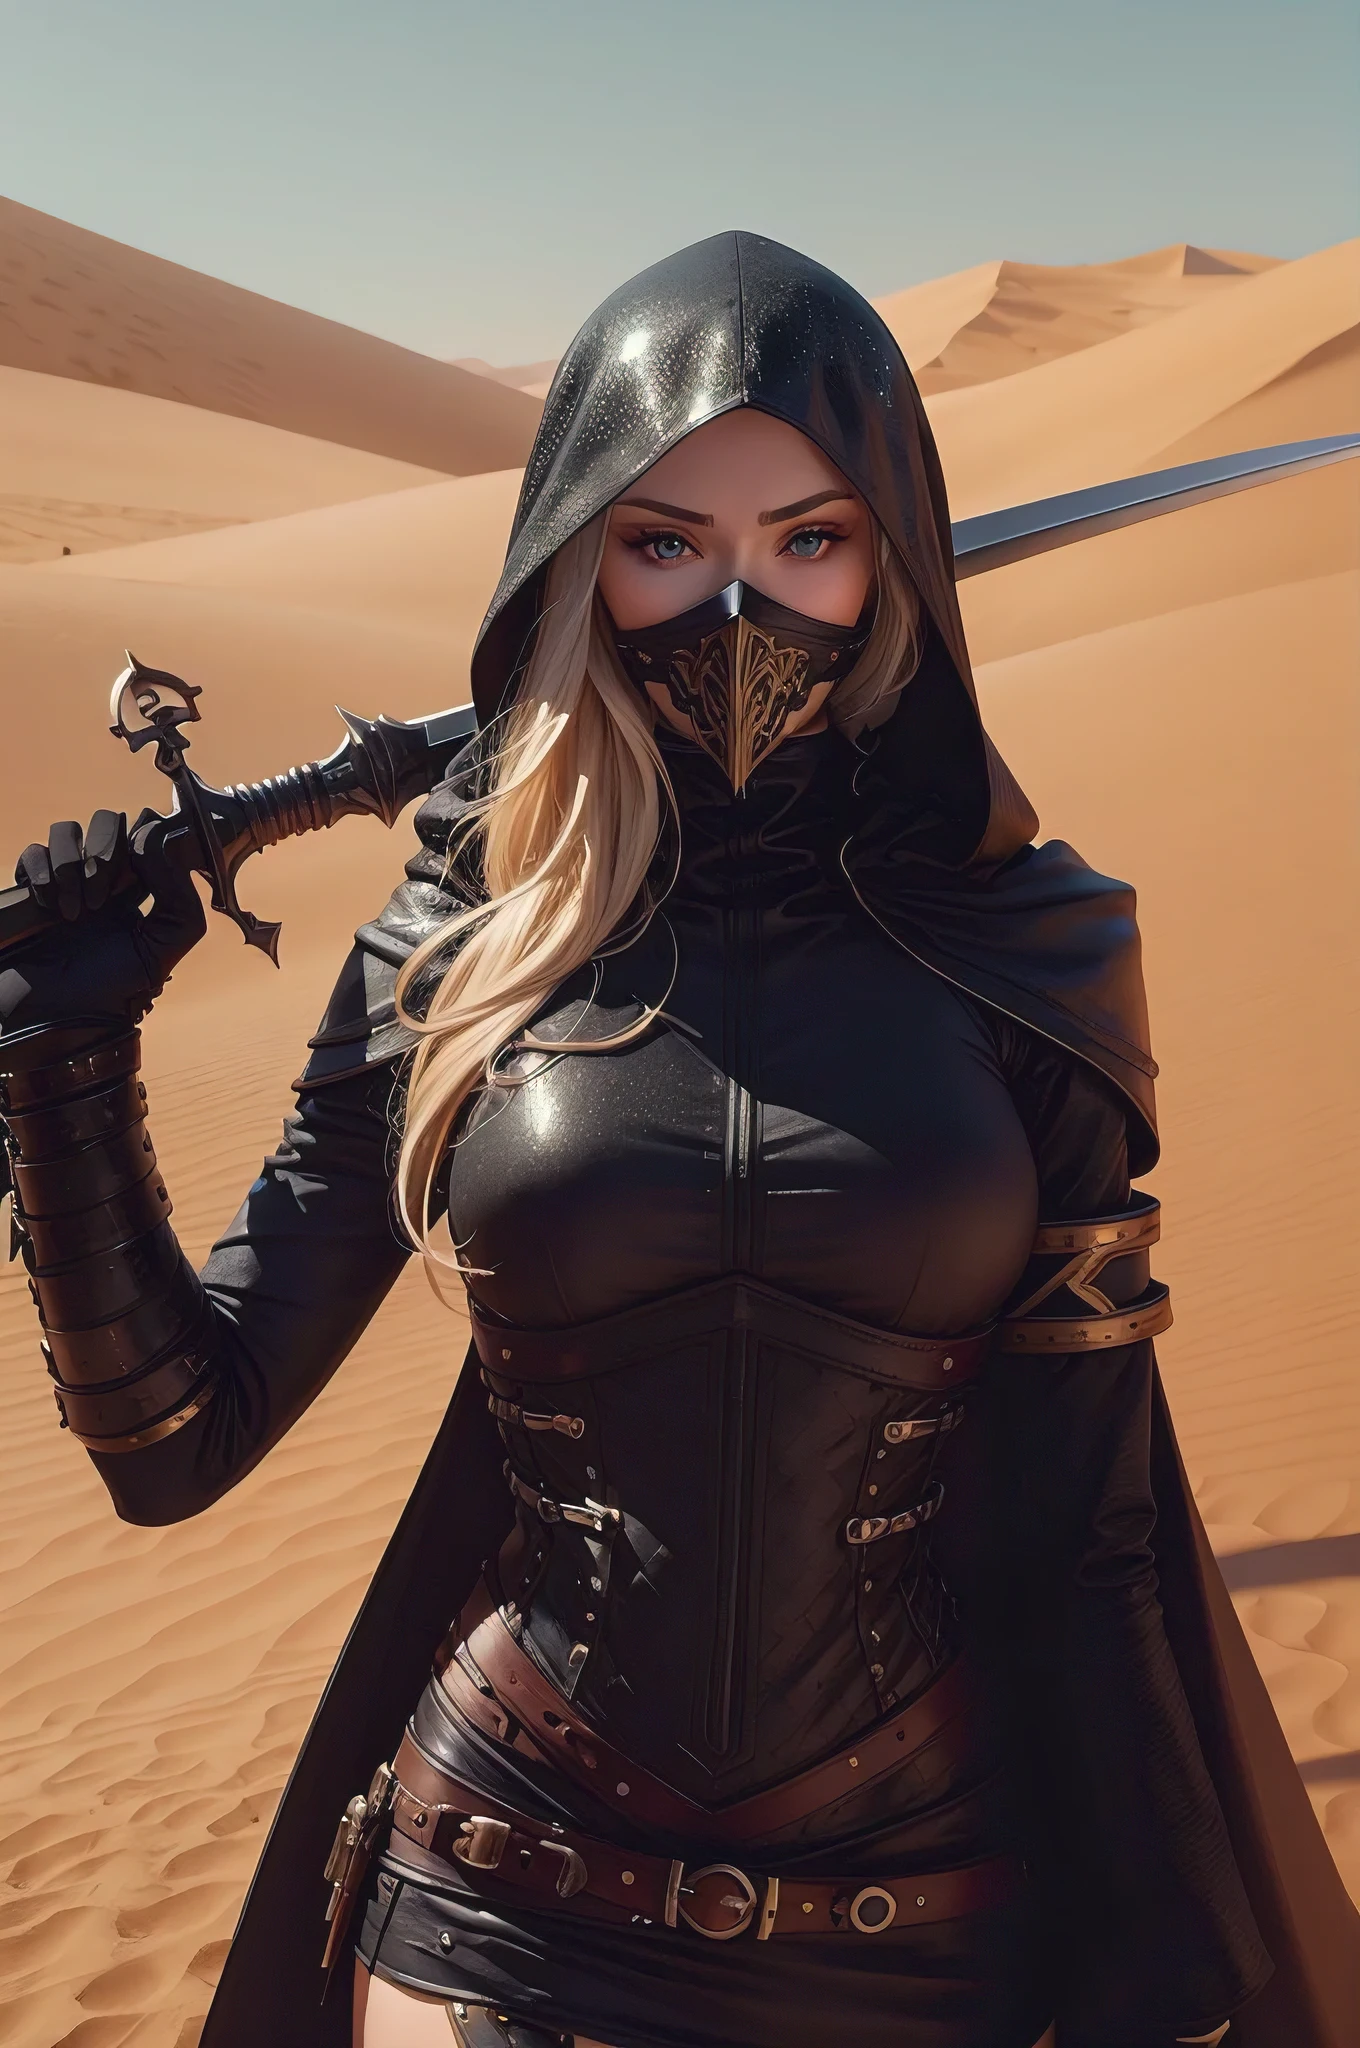 gorgeous stunning immaculate female with blue eyes golden hair in fishtail style, assassins mask and cloak, black gloves, black leather pants, only eyes visible, has sword on back and dagger in hand, background is scorching hot red sand desert, dunes, Full scale, full body, wide angle, romantic, dreamy, ethereal, Cinematic, Photoshoot, Shot on 35mm lens, Depth of Field, DOF, Tilt blur, Shutter speed 1/1000, F/22, White balance, 32k, Super-resulution, Megapixel, Pro Photo RGB, VR, , Good, Massive, Half rear Lighting, Backlight, Dramatic Lighting, Incandescent, Optical Fiber, Moody Lighting, Cinematic Lighting, Studio Lighting, Soft Lighting, Volumetric, Conte-Jour, Beatiful Lighting, Accent Lighting, Global Illuminating, Screen space Global illuminating, Ray Tracing Global Illuminating, Optics, Scattering, Glowing, Shadows, Rough, Shimmering, Ray tracing reflections, Lumen Reflections, Screen space reflections, Diffraction grading, Chromatic Aberration, GB Displacement, Scan lines, Ray traced, ray traceing Ambient occlusion, Anti aliasing, FKAA, TXAA, RTX, SSAO, Shaders, Open-GL Shaders, GLSL-Shaders, Post Processing, Post Production, Cell Shading, Tone Mapping, CGI, VFX, SFX, insanely detailed and intricate, hyper maximalist, elegant, super detailed, dynamic pose, photography, volumetric, ultra-detailed, intricate detailes, 8K, super detailed, ambient